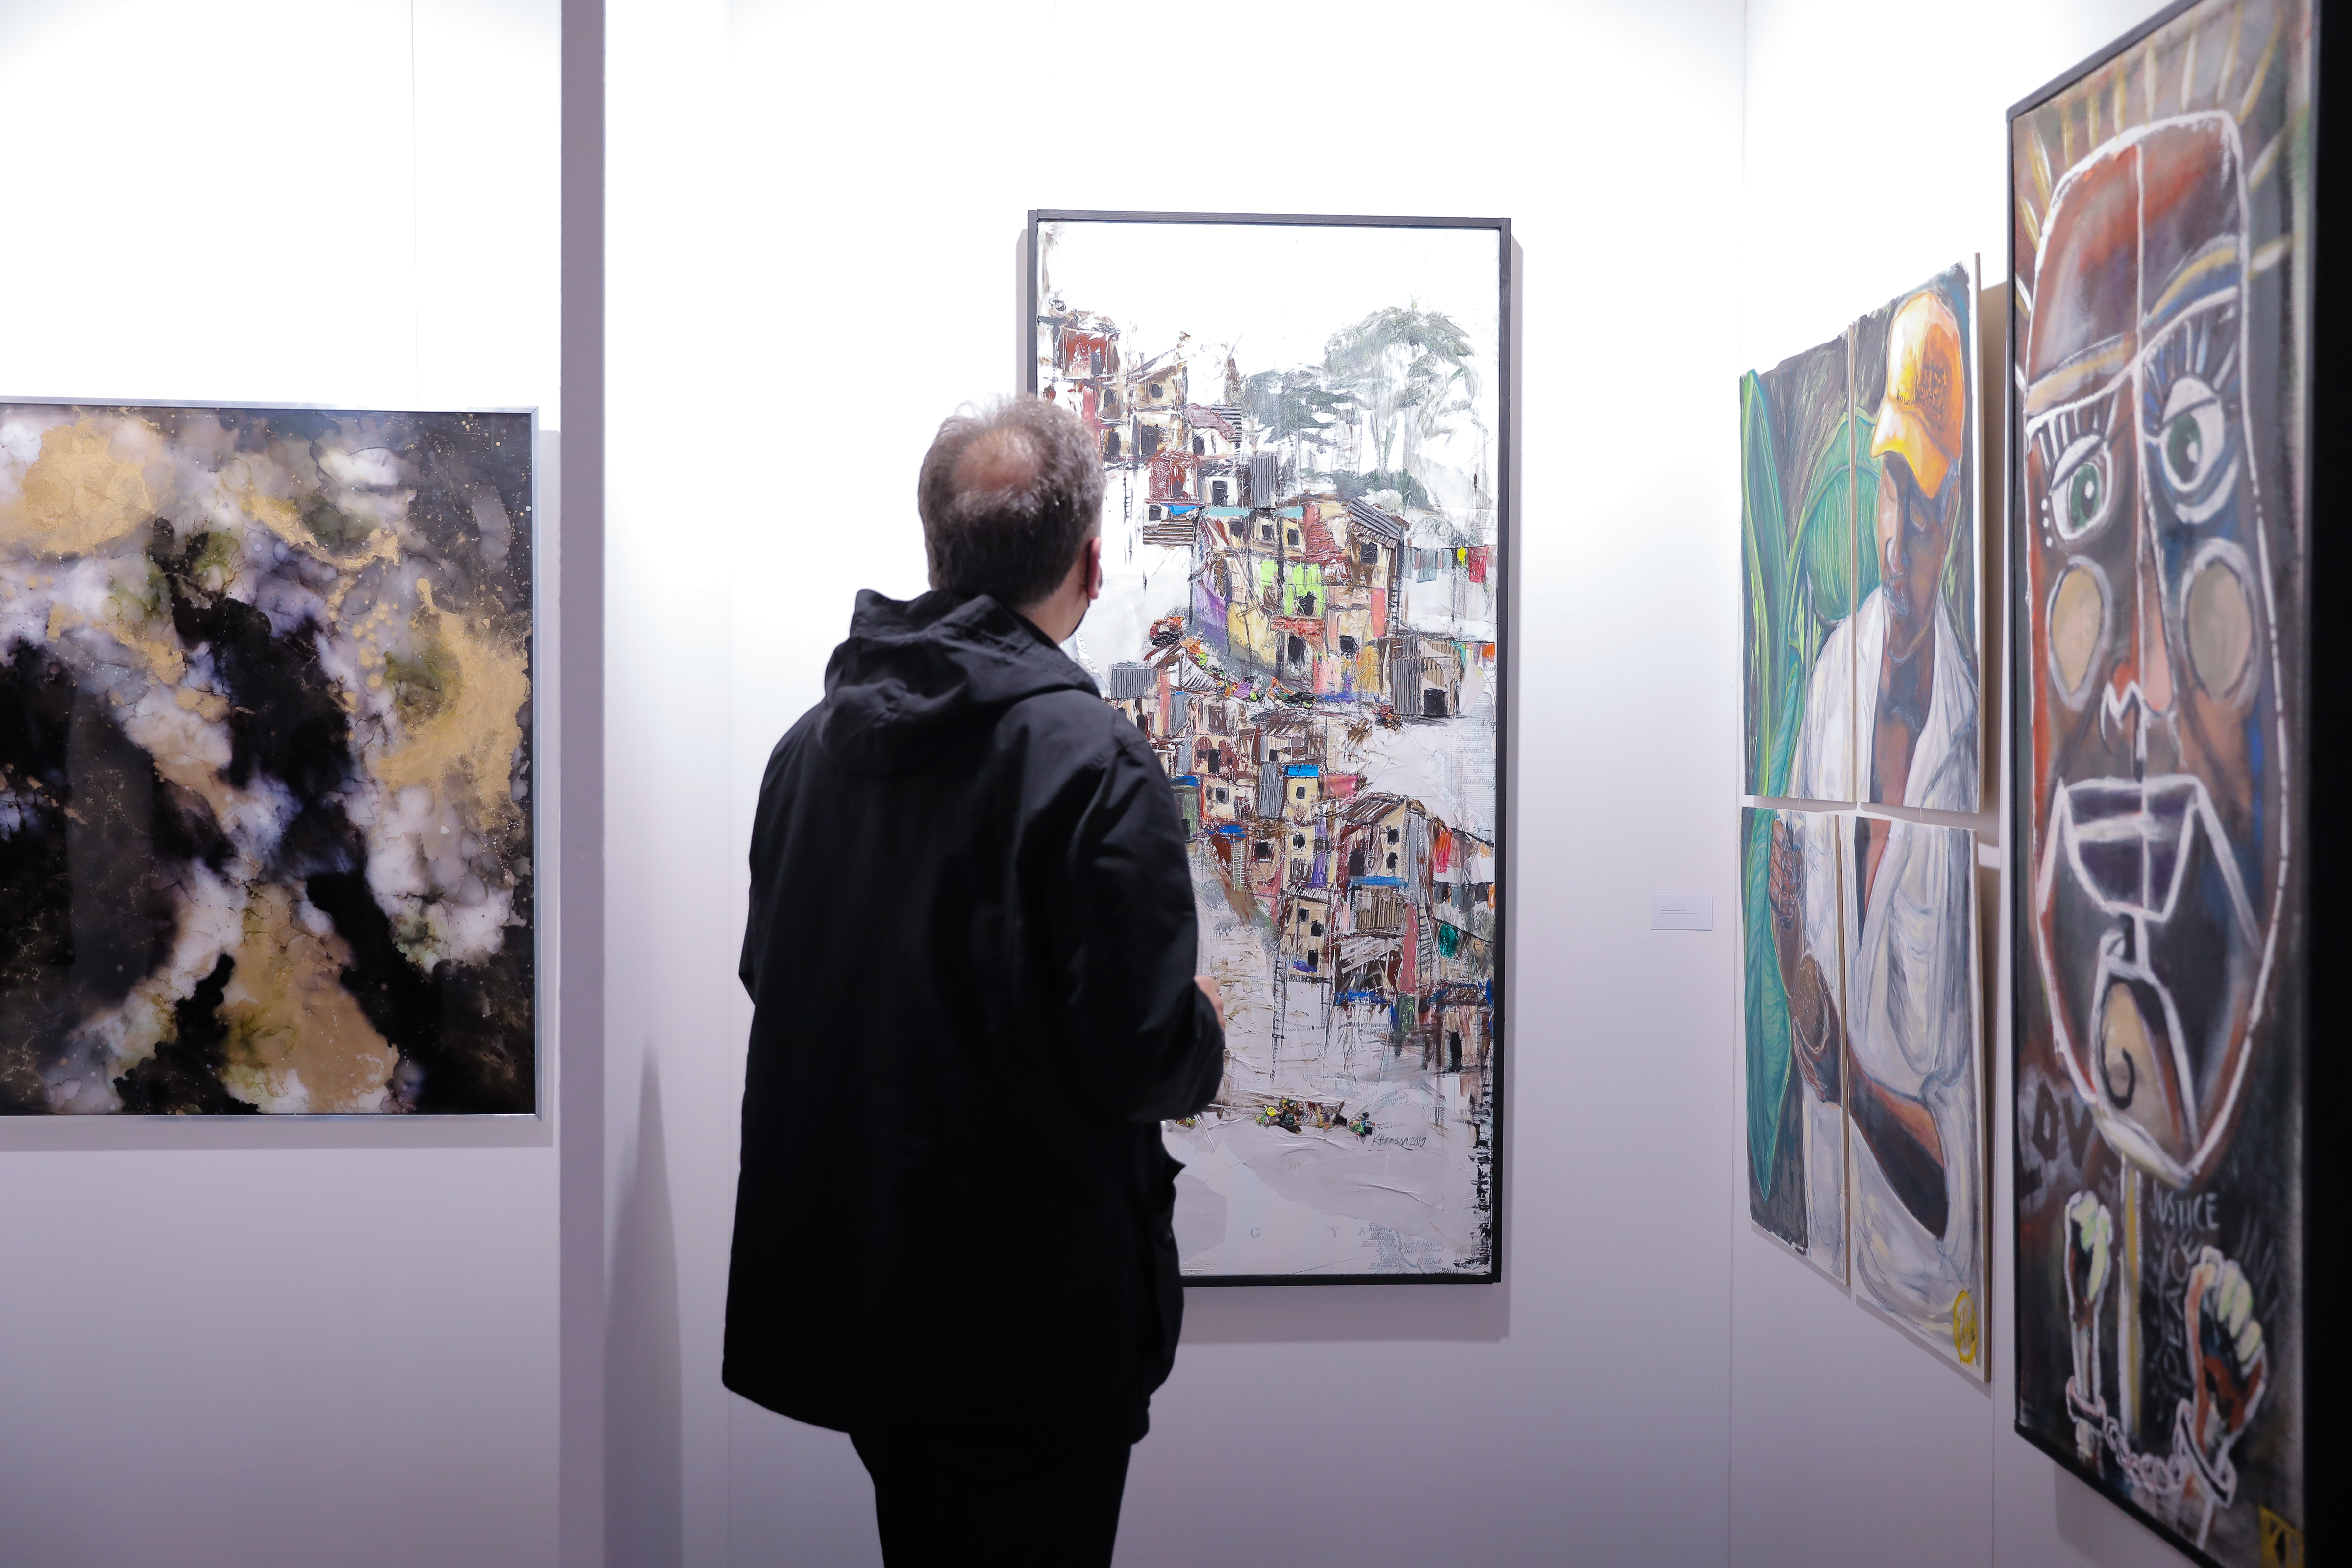 Tokyo Tower Art Fair Presents The First Edition Of Its 3-Day Contemporary Art Fair, Showcasing Masterpieces From International Artists